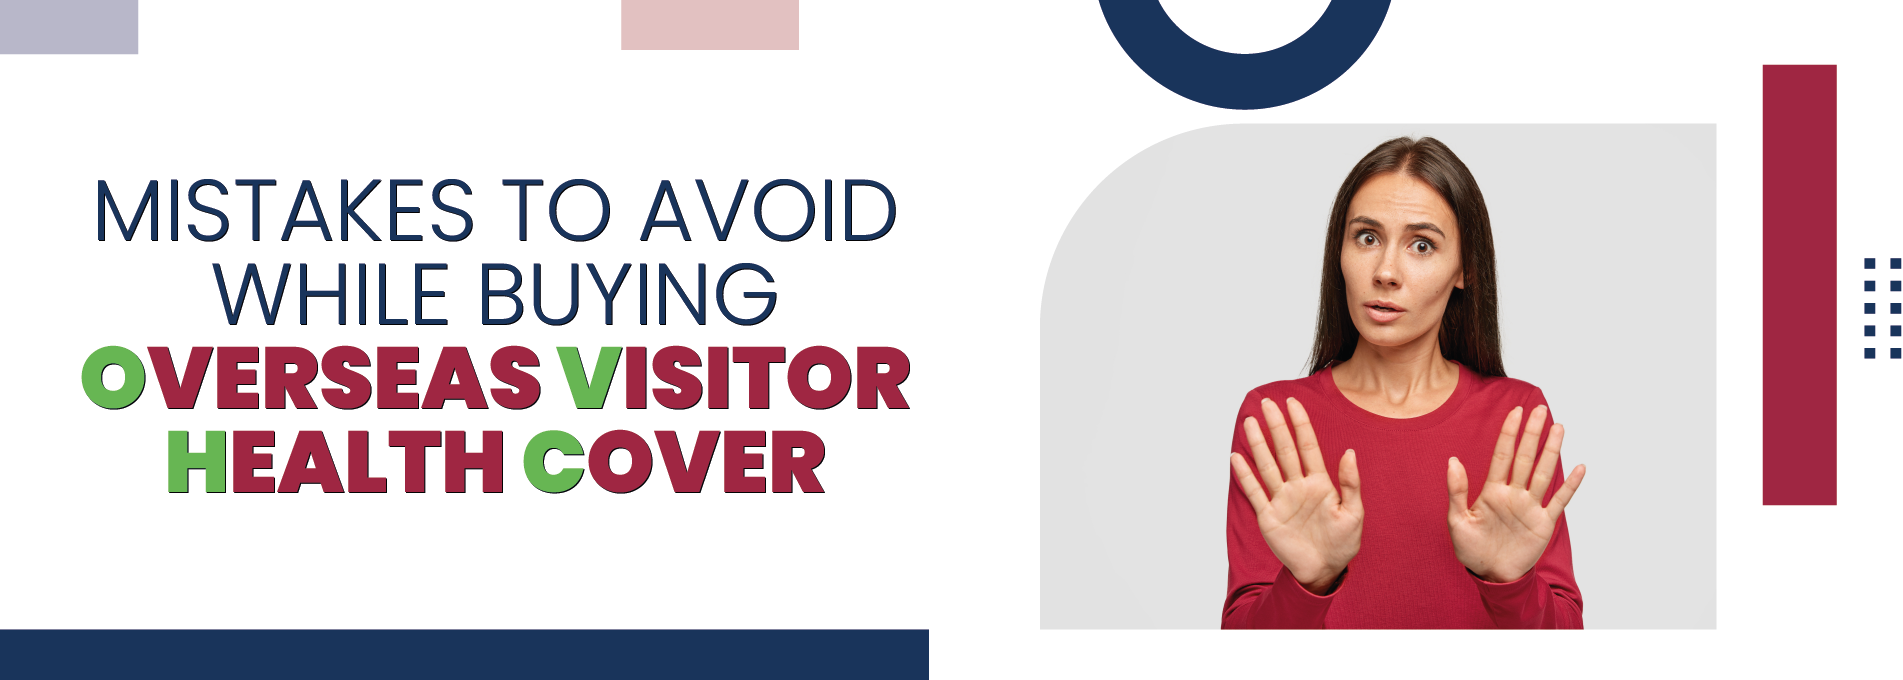 Mistakes to Avoid While Buying Overseas Visitor Health Cover